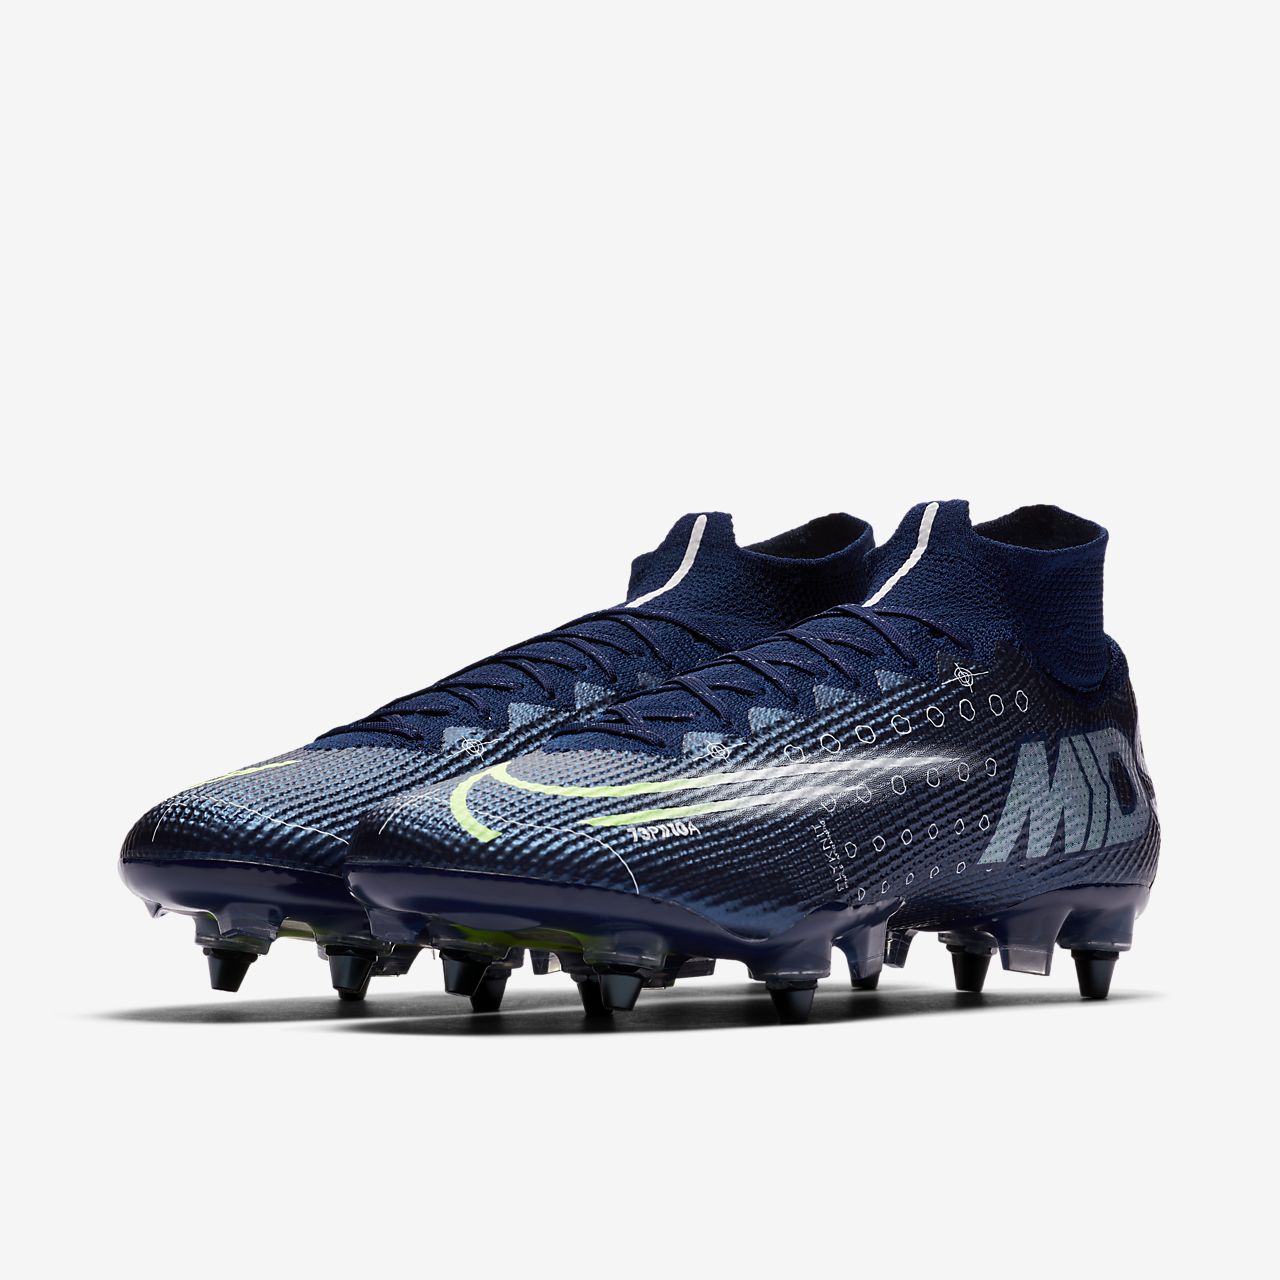 Nike Mercurial Superfly 7 Pro Ag pro Artificial Socks Boots.